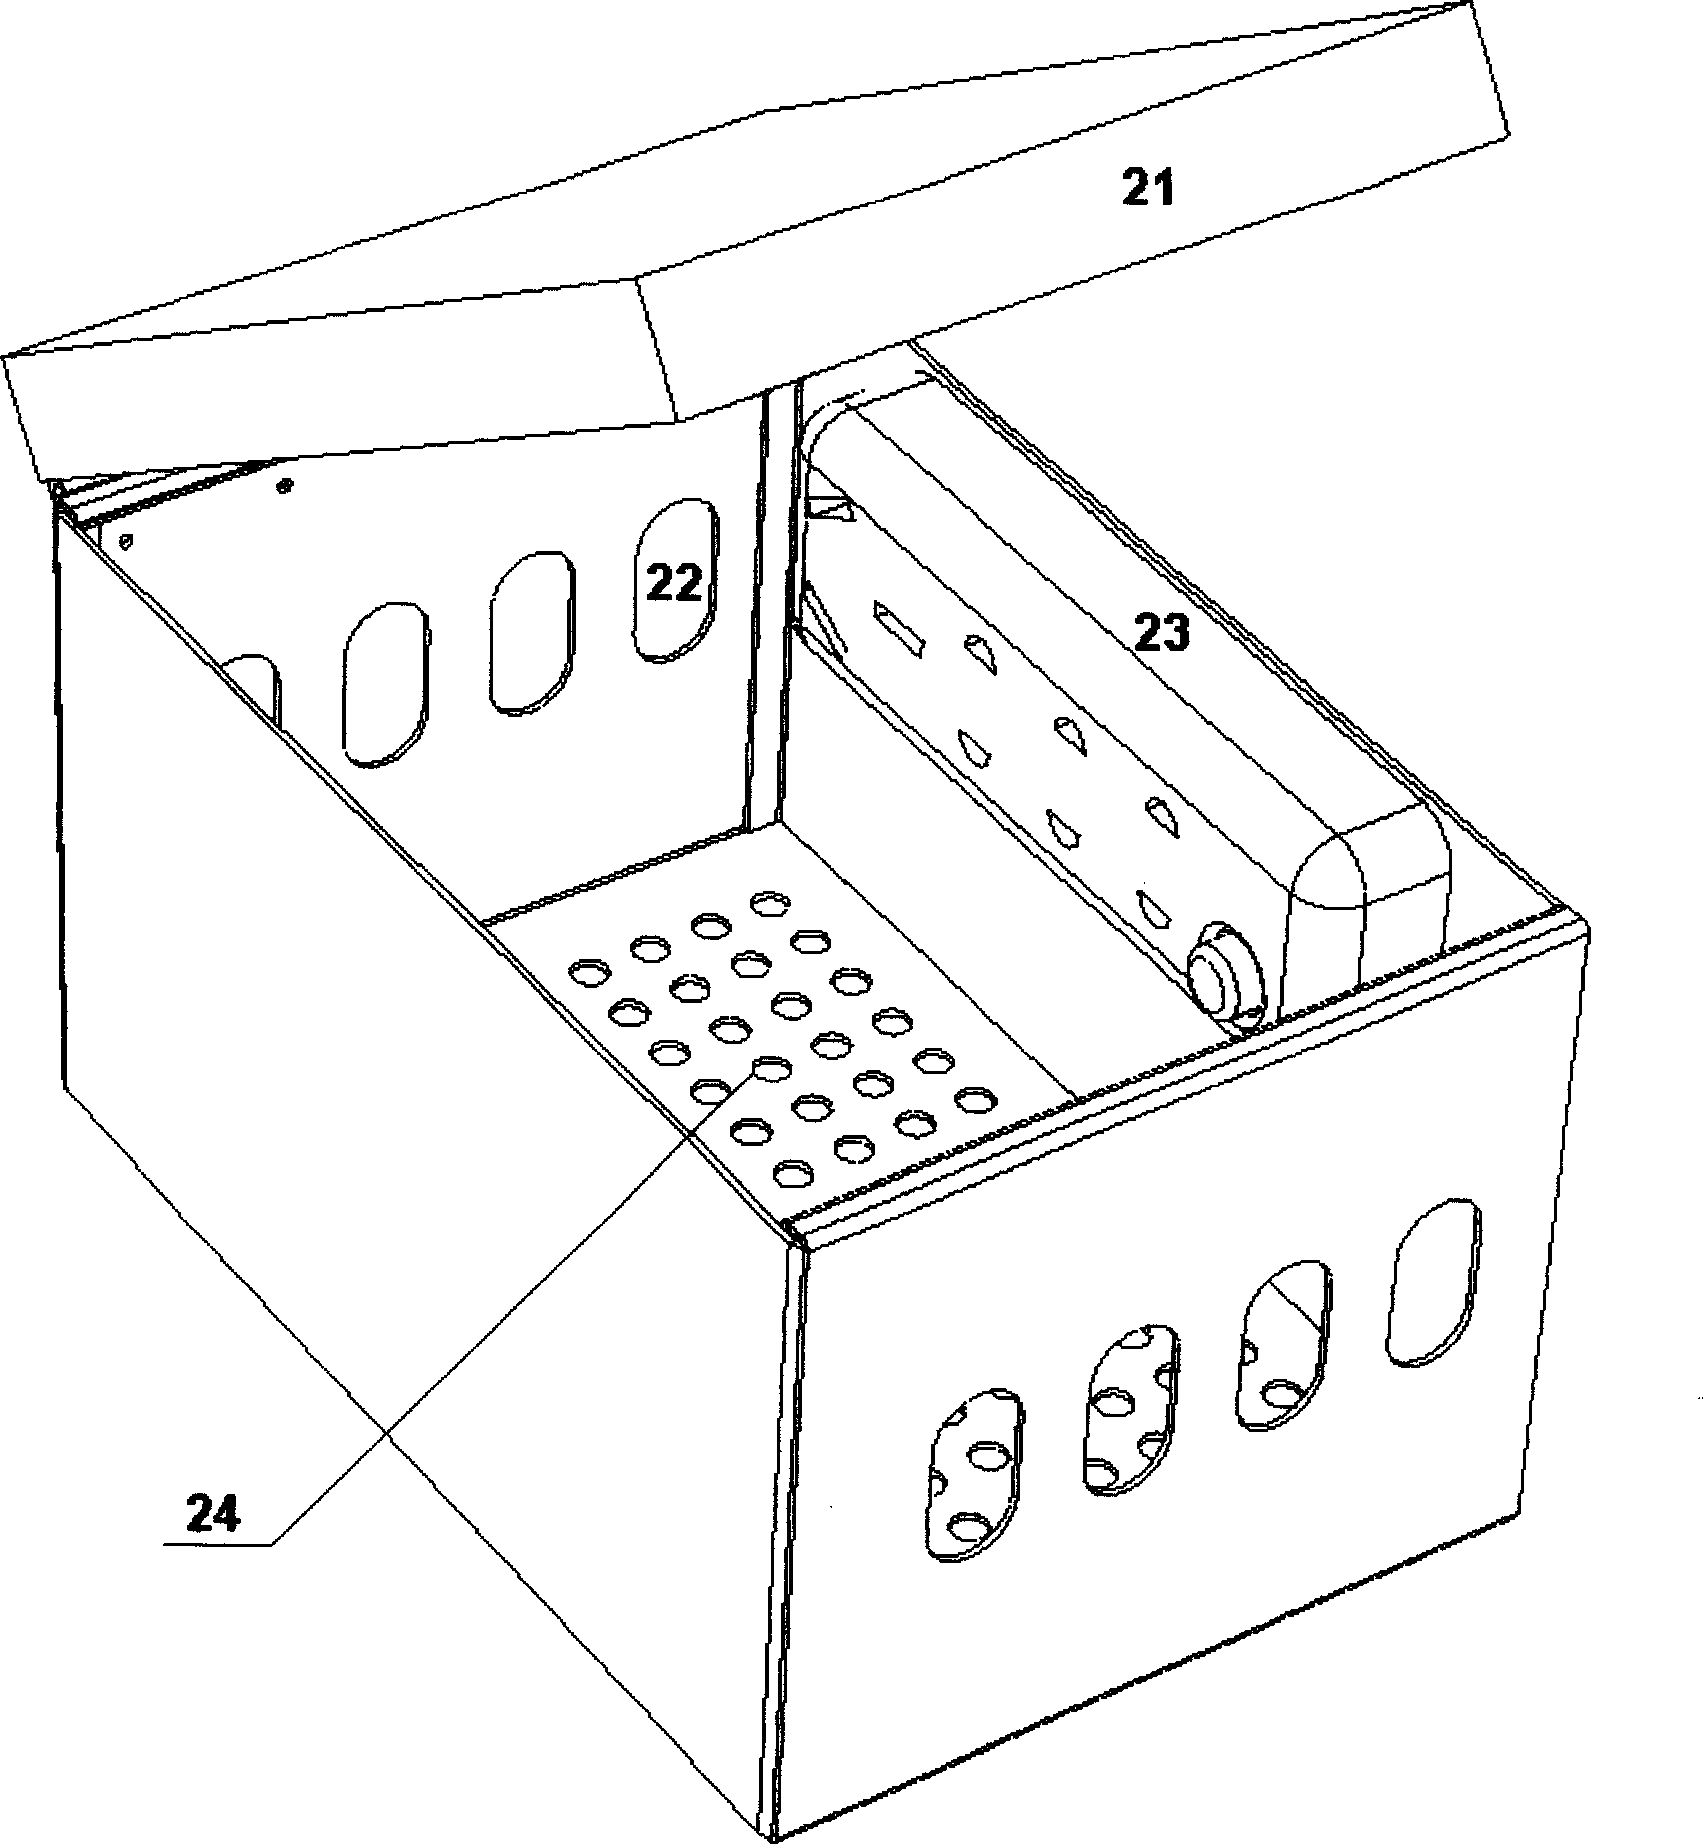 Table type computer